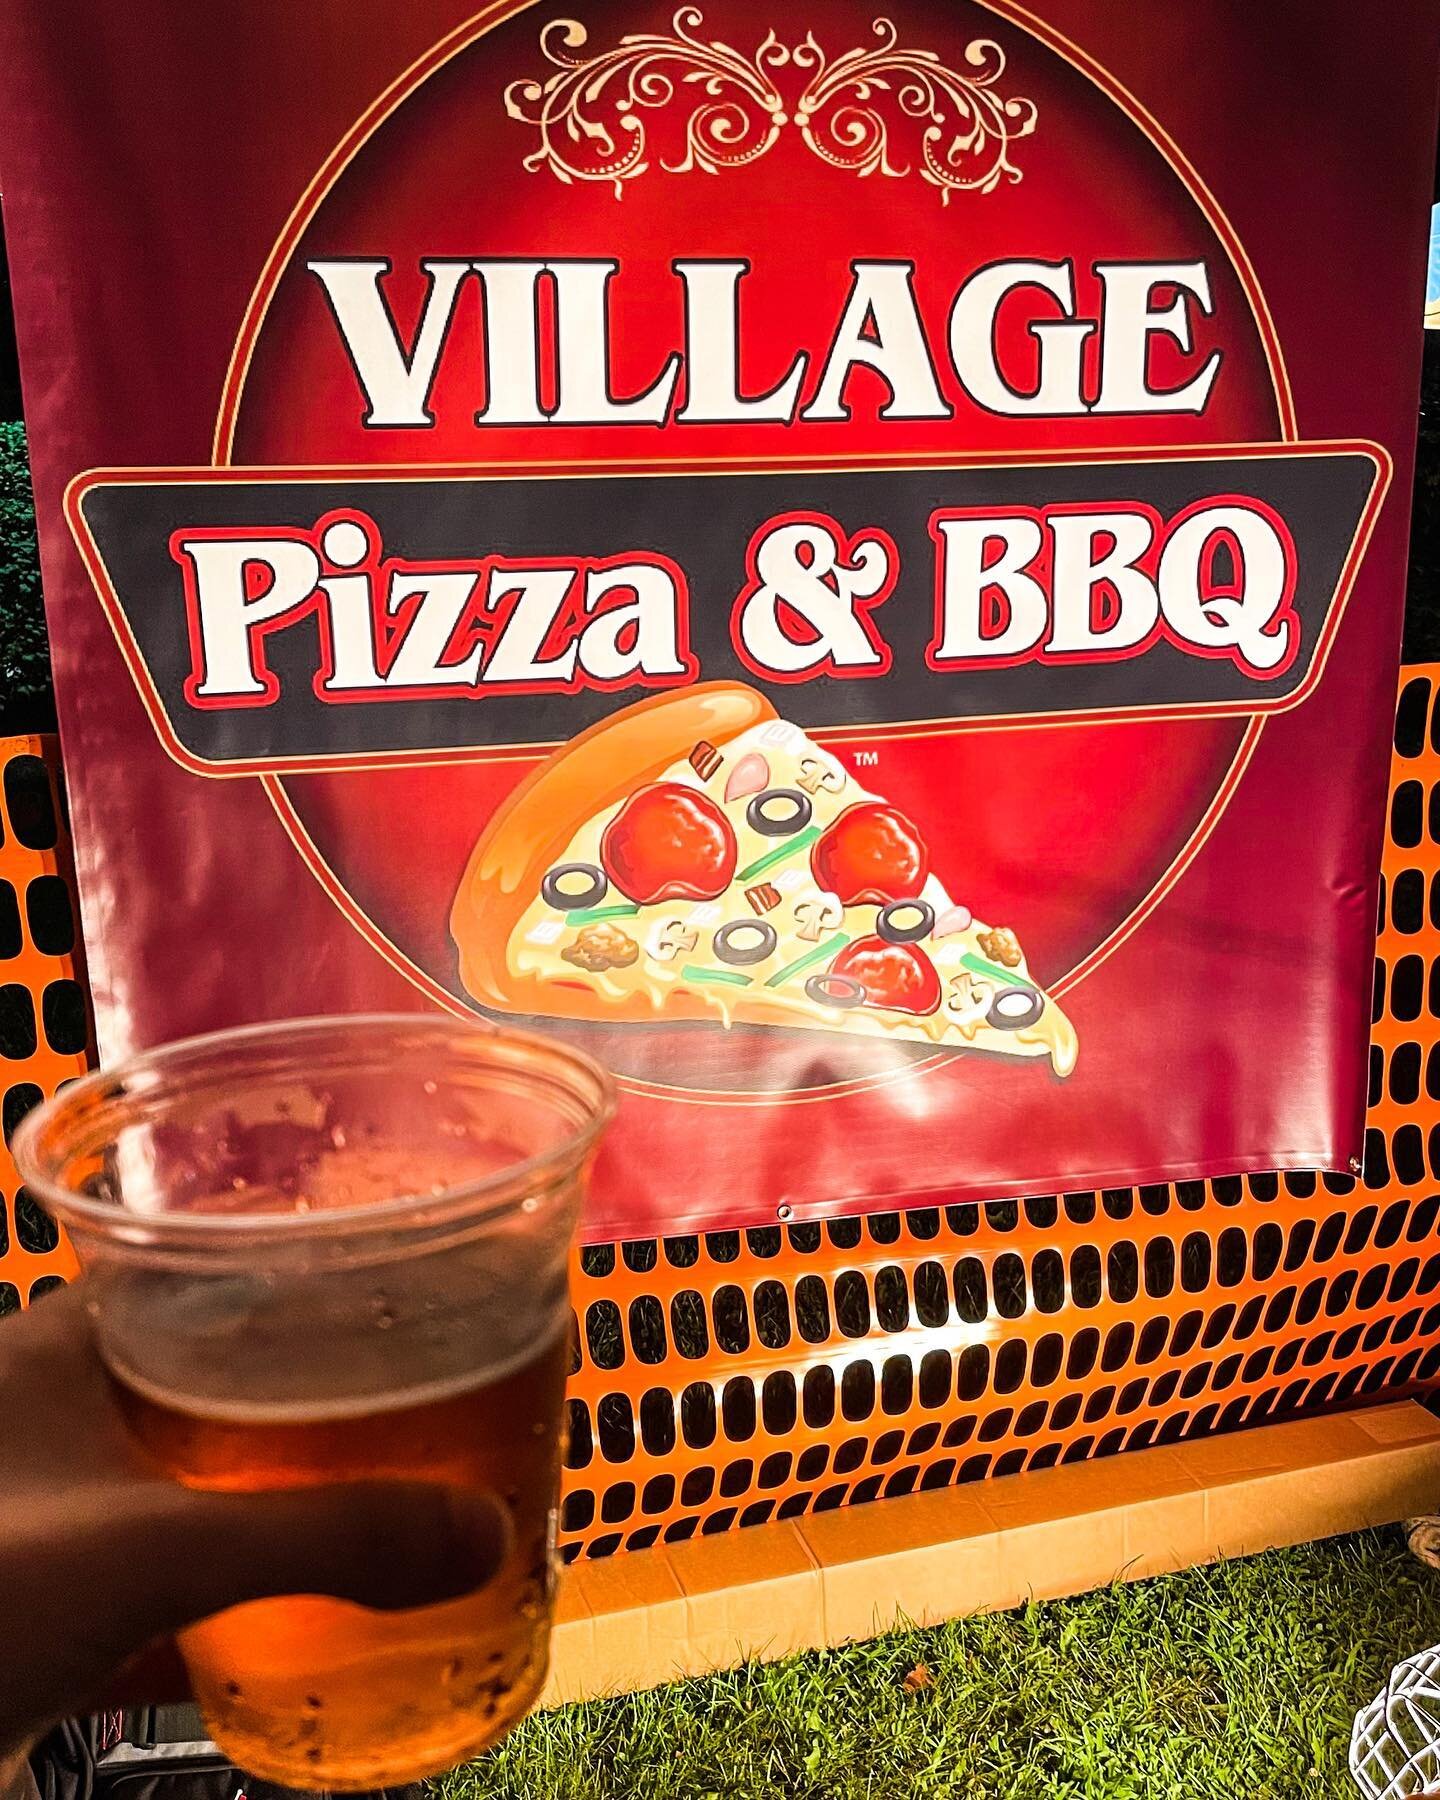 Milford Memories is always a great time! Thank you to all who visited us at the beer tent! 🍺 🍕 we LOVED seeing you!